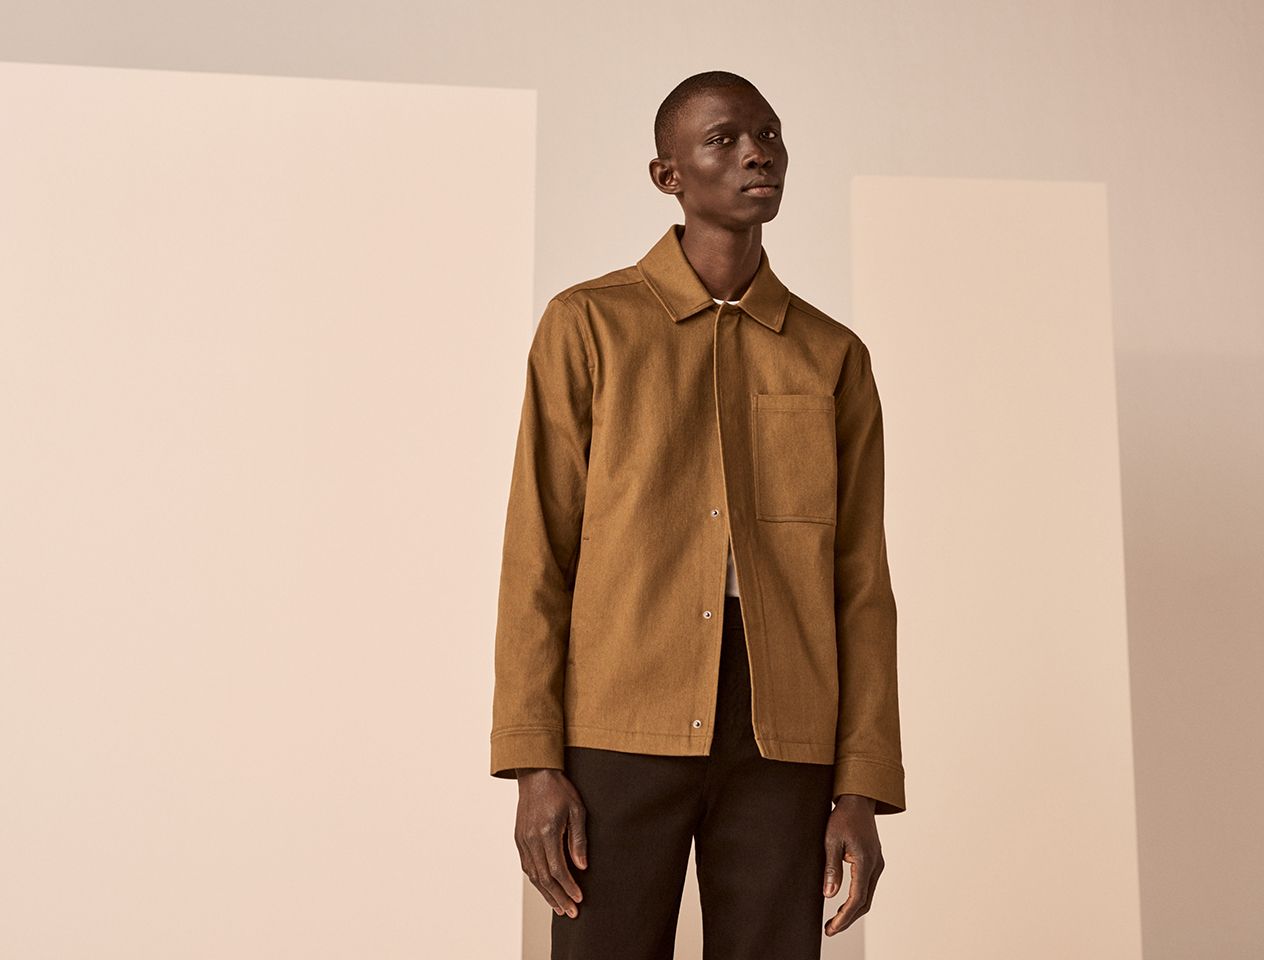 First look: Kin’s spring/summer 2020 collection has landed